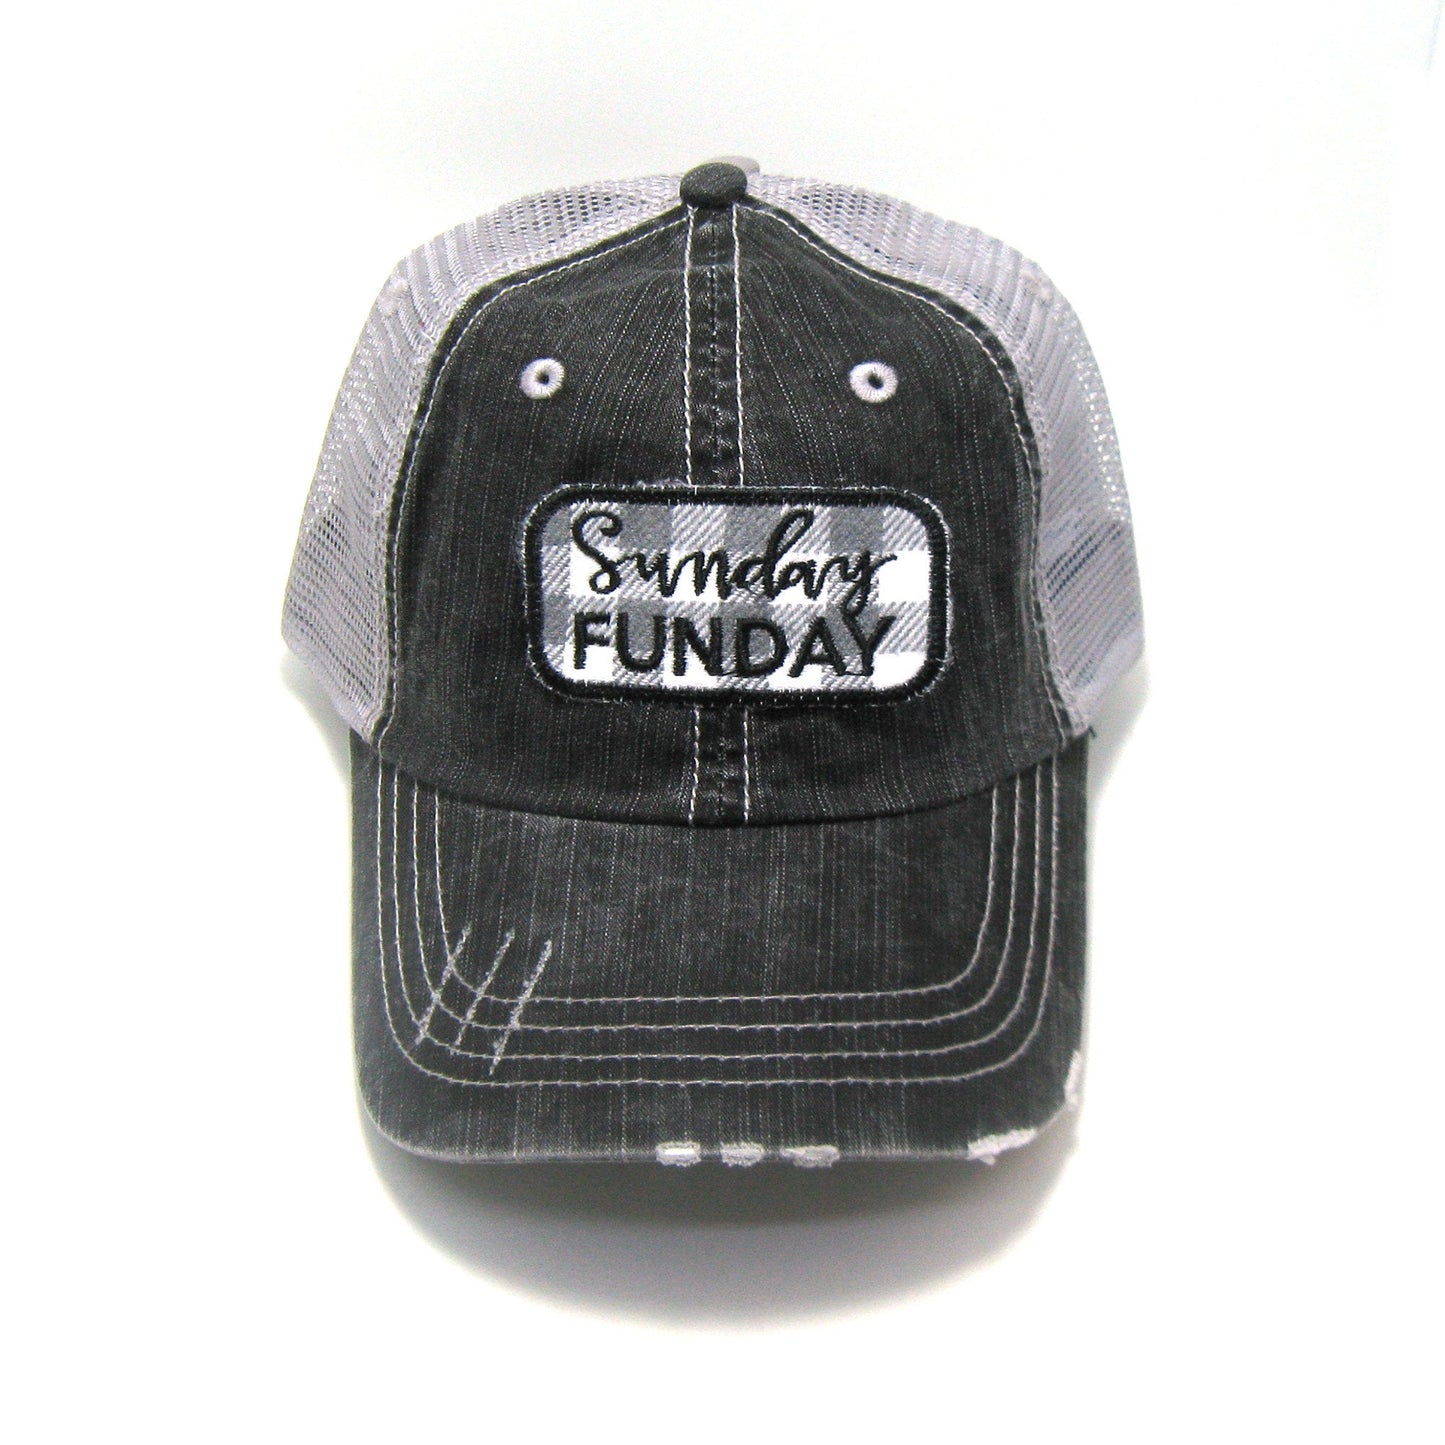 Sunday Funday Hat - Gray Distressed Trucker Hat